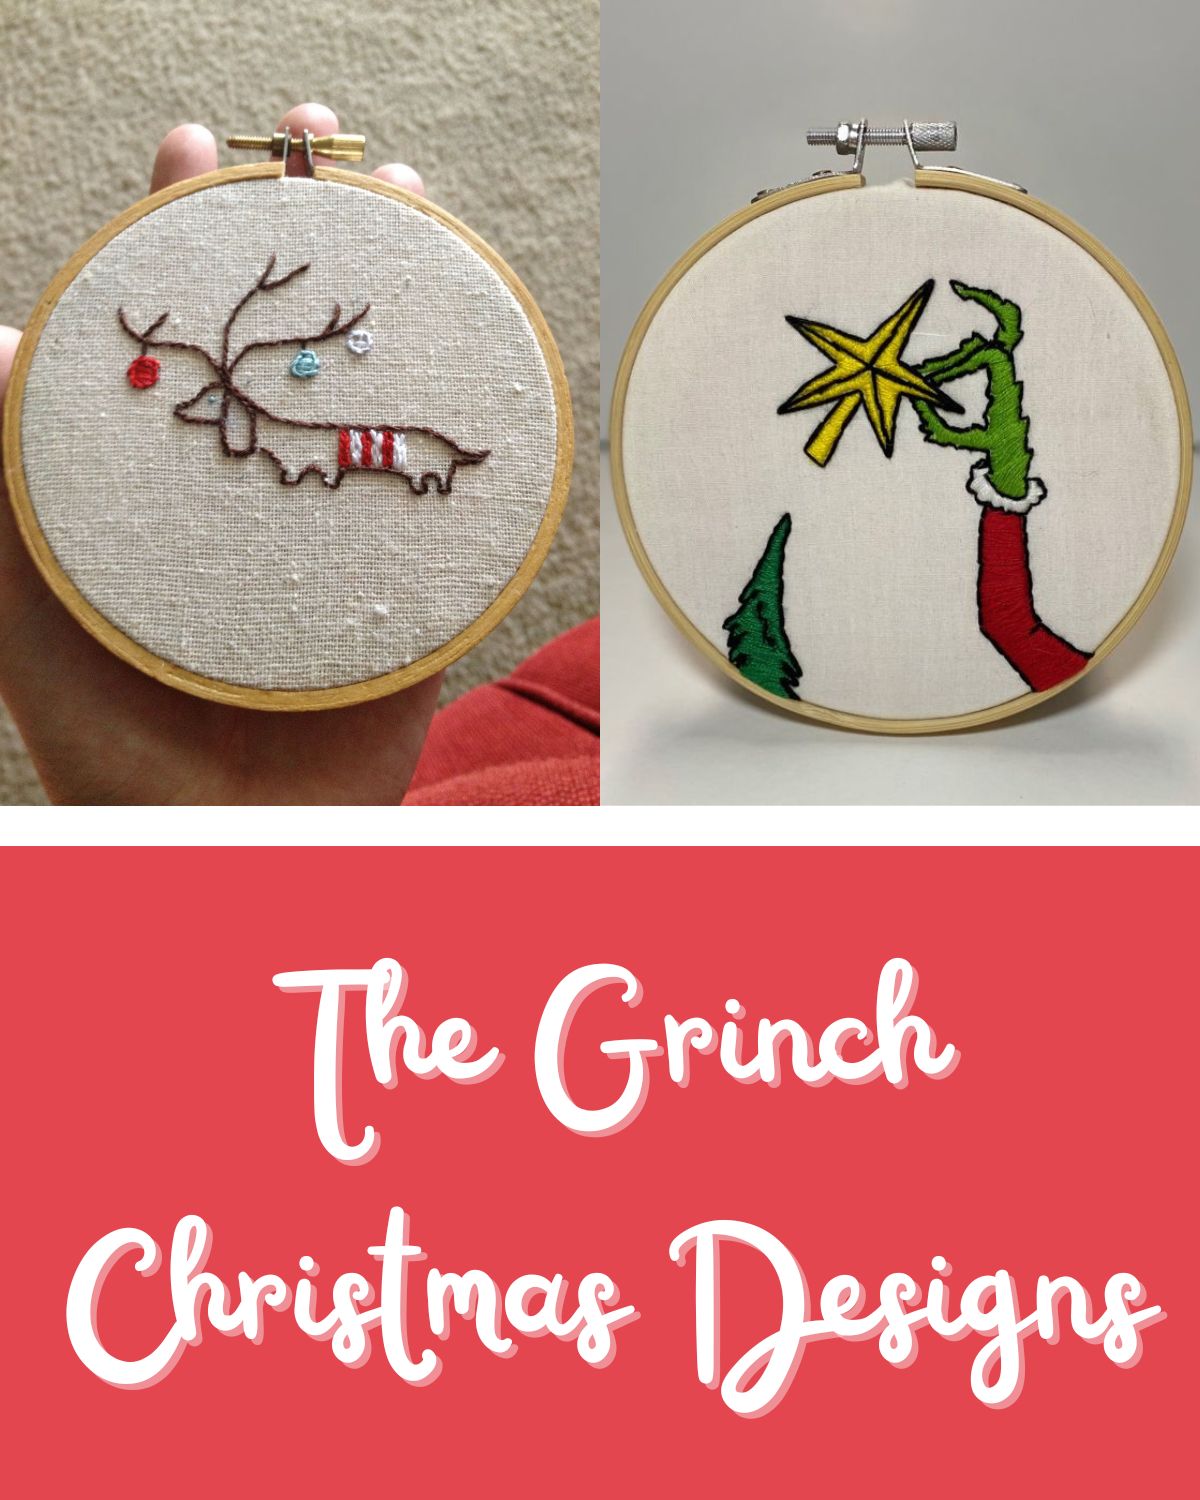 Two Christmas embroidery pieces